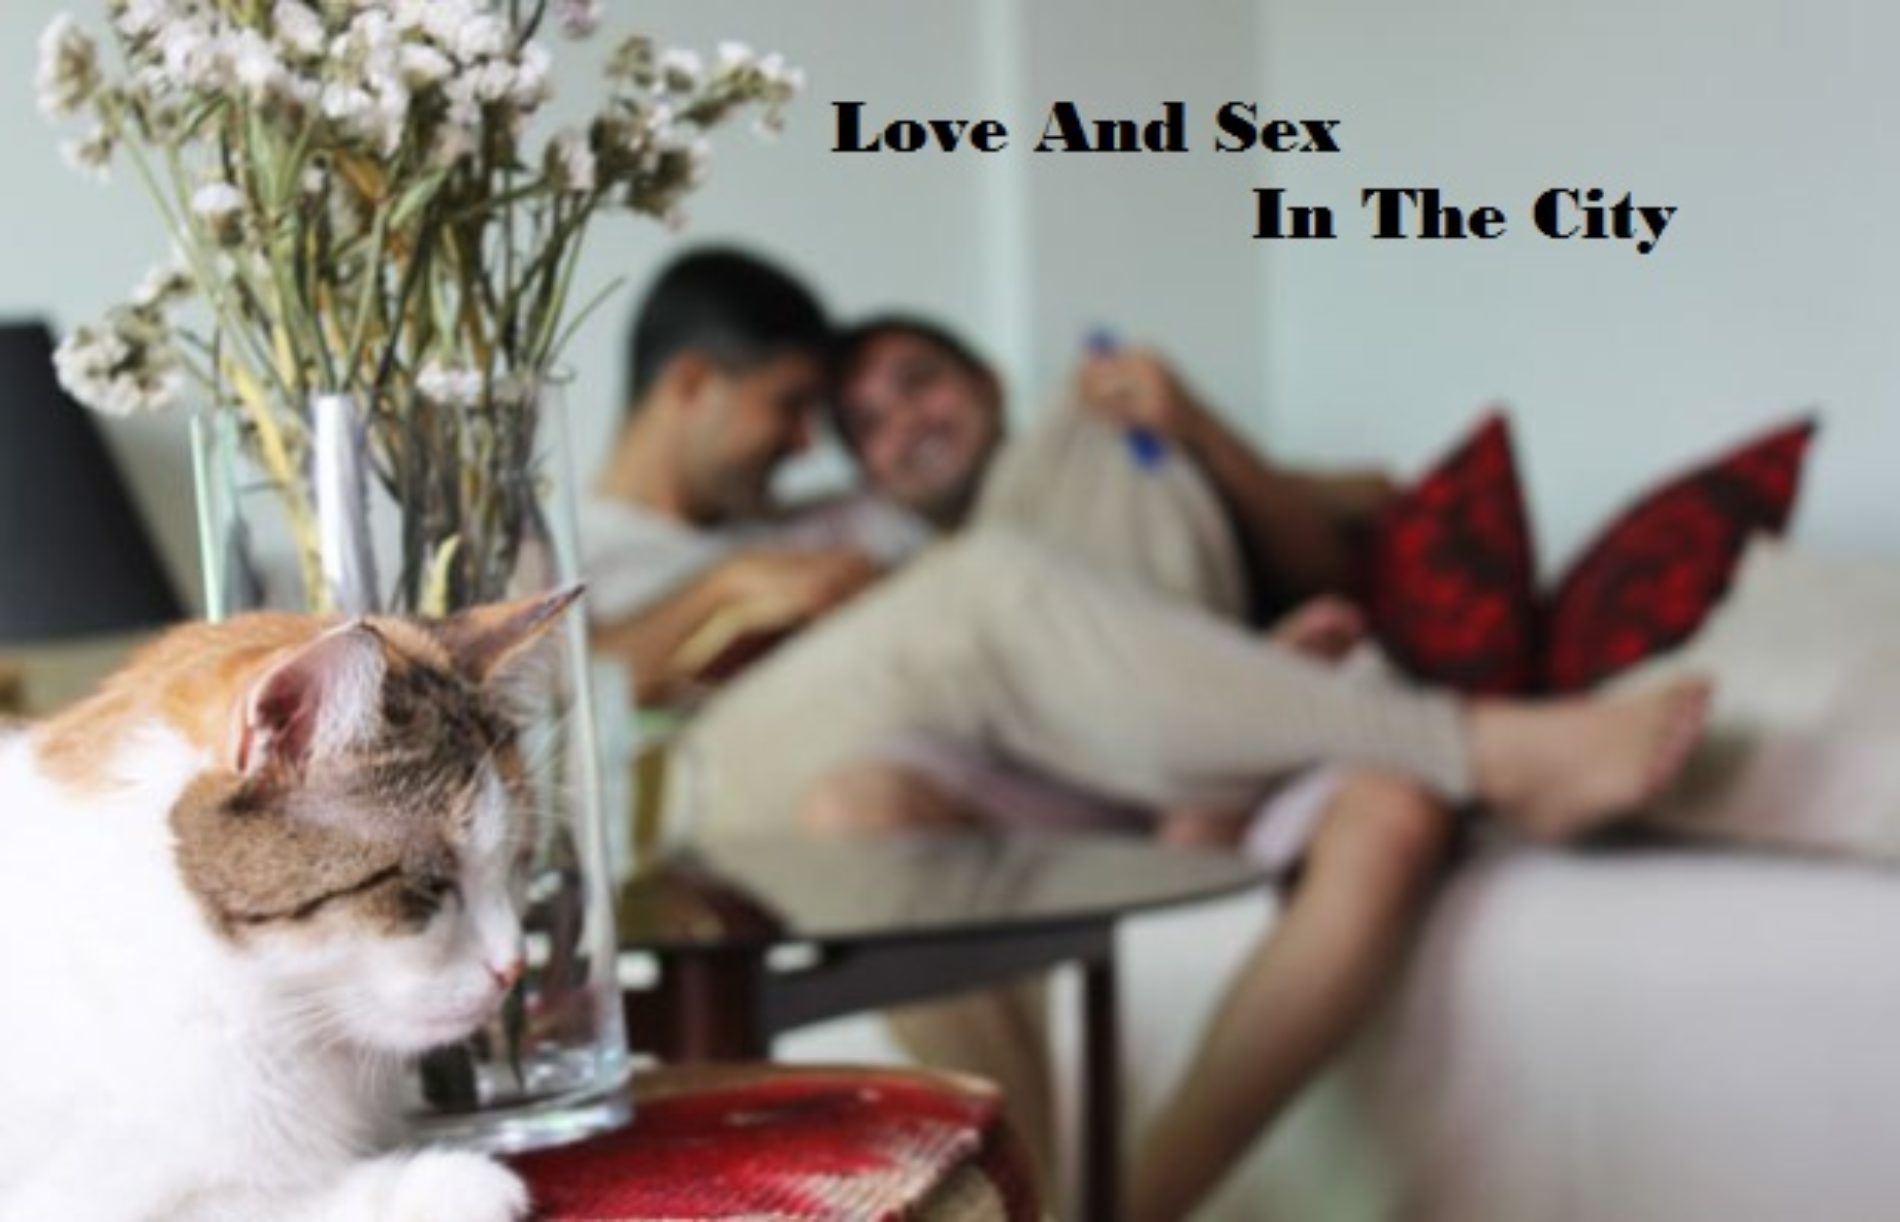 LOVE AND SEX IN THE CITY (Episode 26)